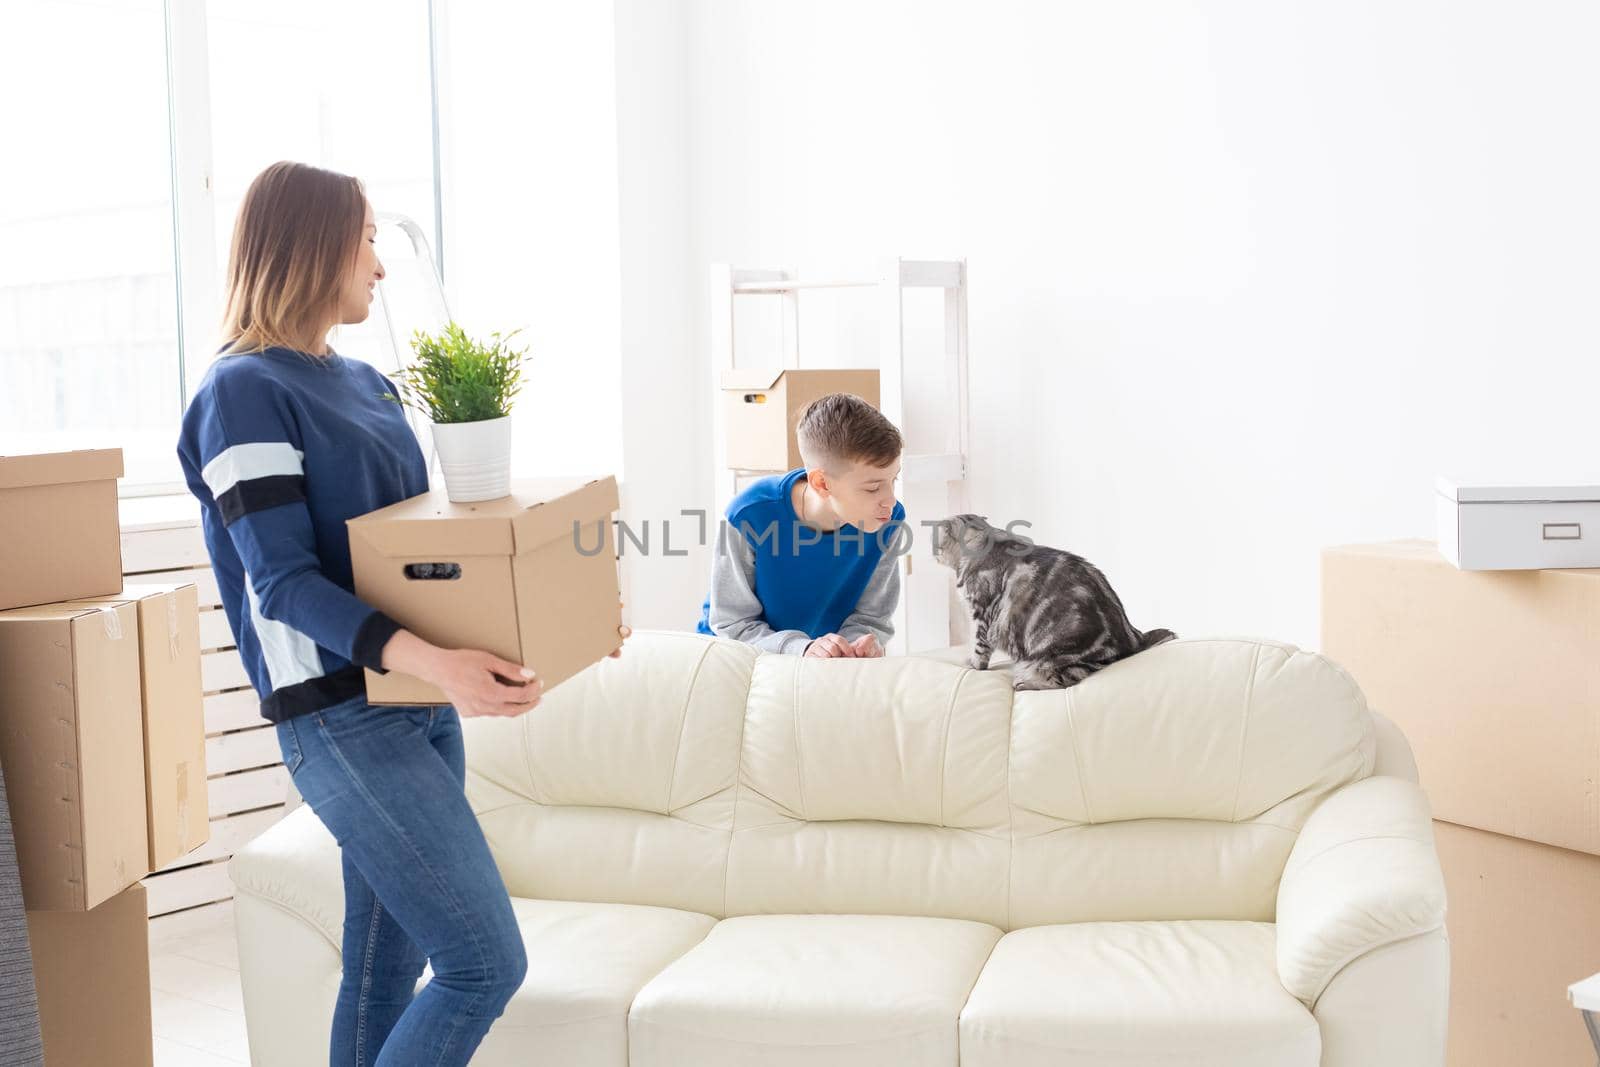 Slim positive young mother and a cute boy son arrange things and communicate with their scottish fold cat. Housewarming and relocation concept.